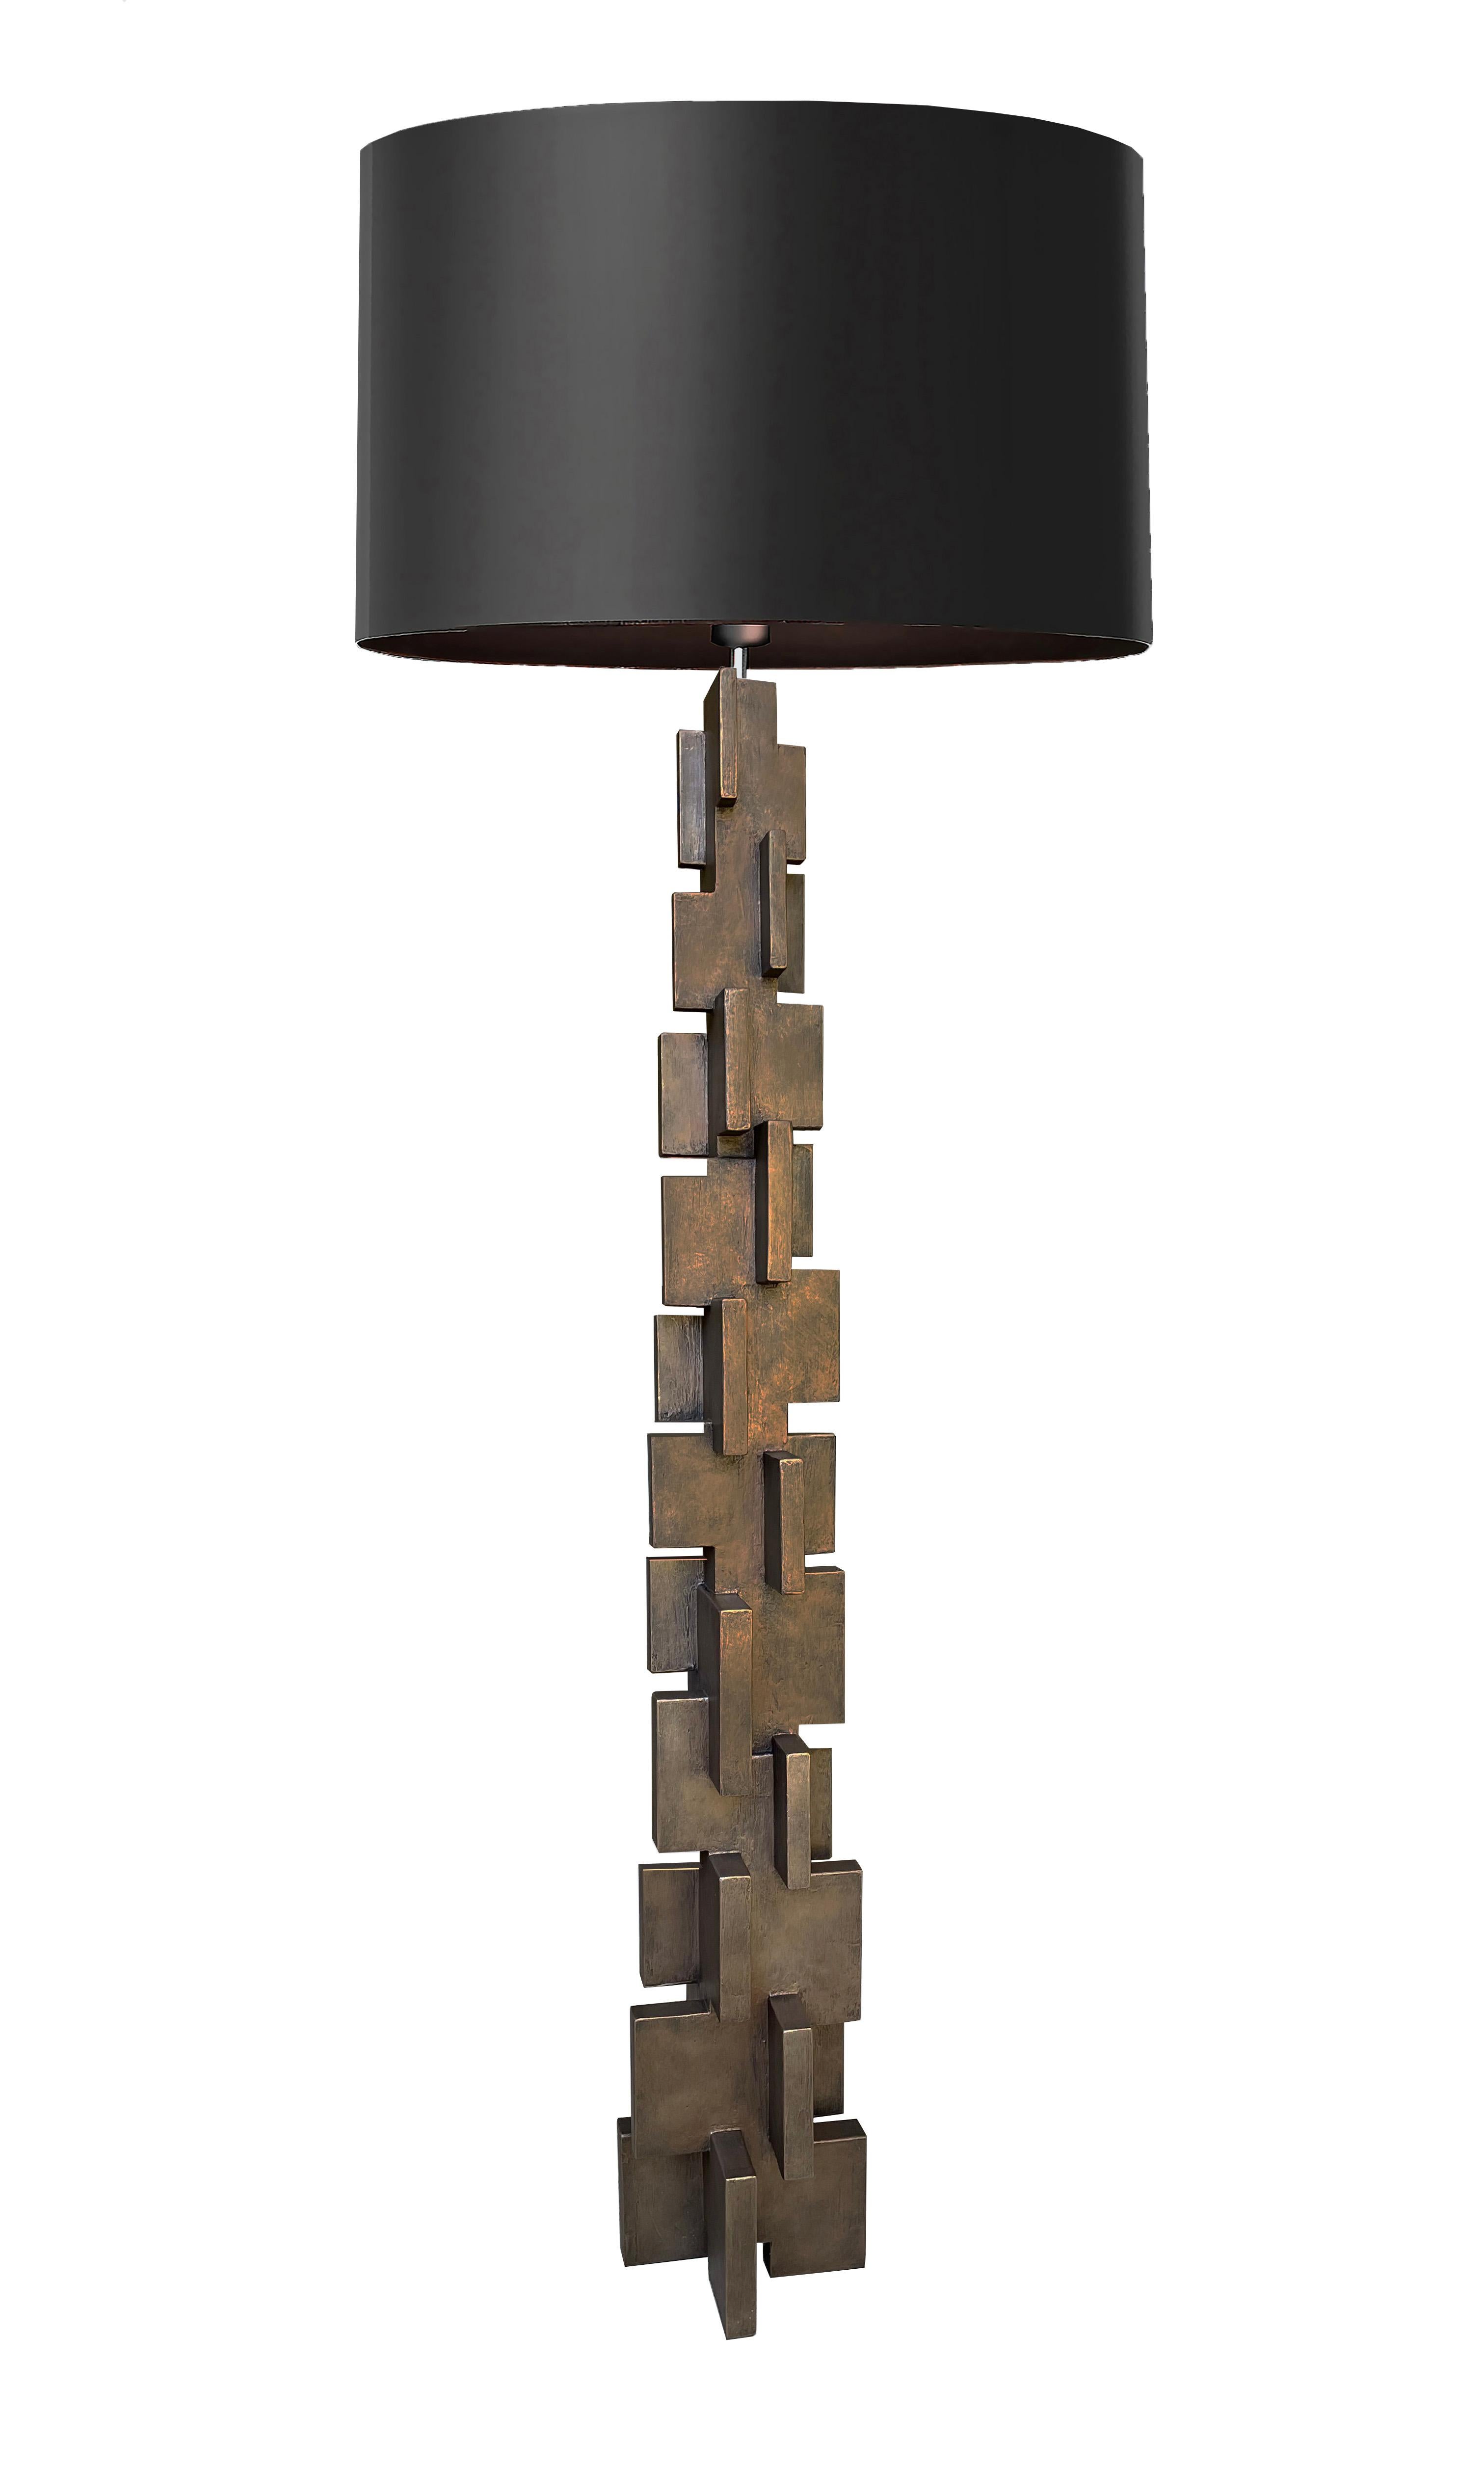 Espina floor lamp by Daniel Schneiger
Dimensions: D 23 x W 23 x H 132 cm
Materials: Wood and resin
Shade not included. Custom finishes available.

All our lamps can be wired according to each country. If sold to the USA it will be wired for the